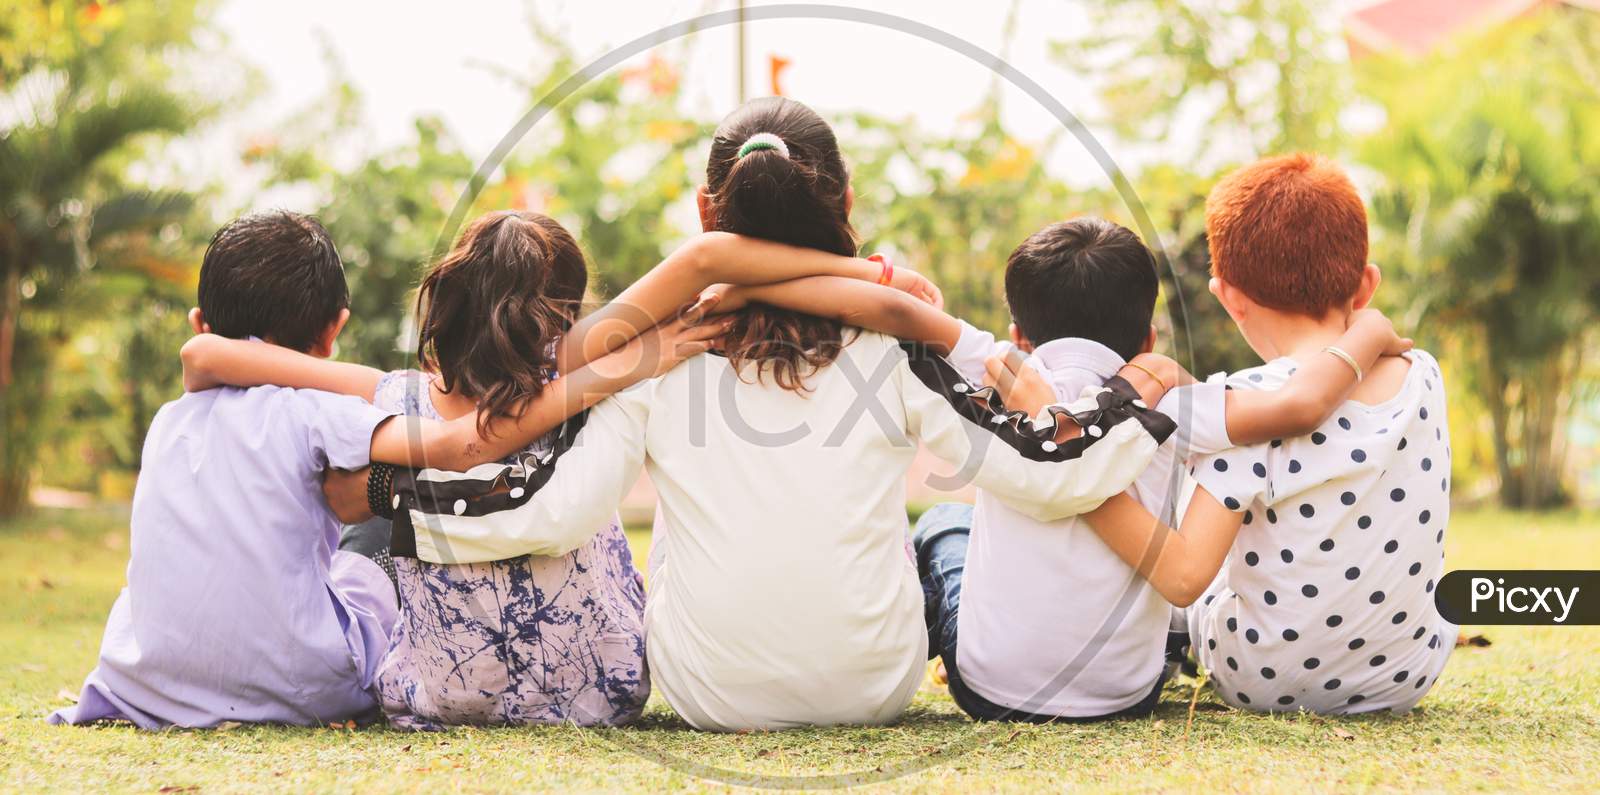 Back View, Group Of Kindergarten Multi Ethnic Kids Friends Arm Around Sitting Together At Park Outdoor - Concept Showing Of Childhood Friendship, Togetherness With Diversities.